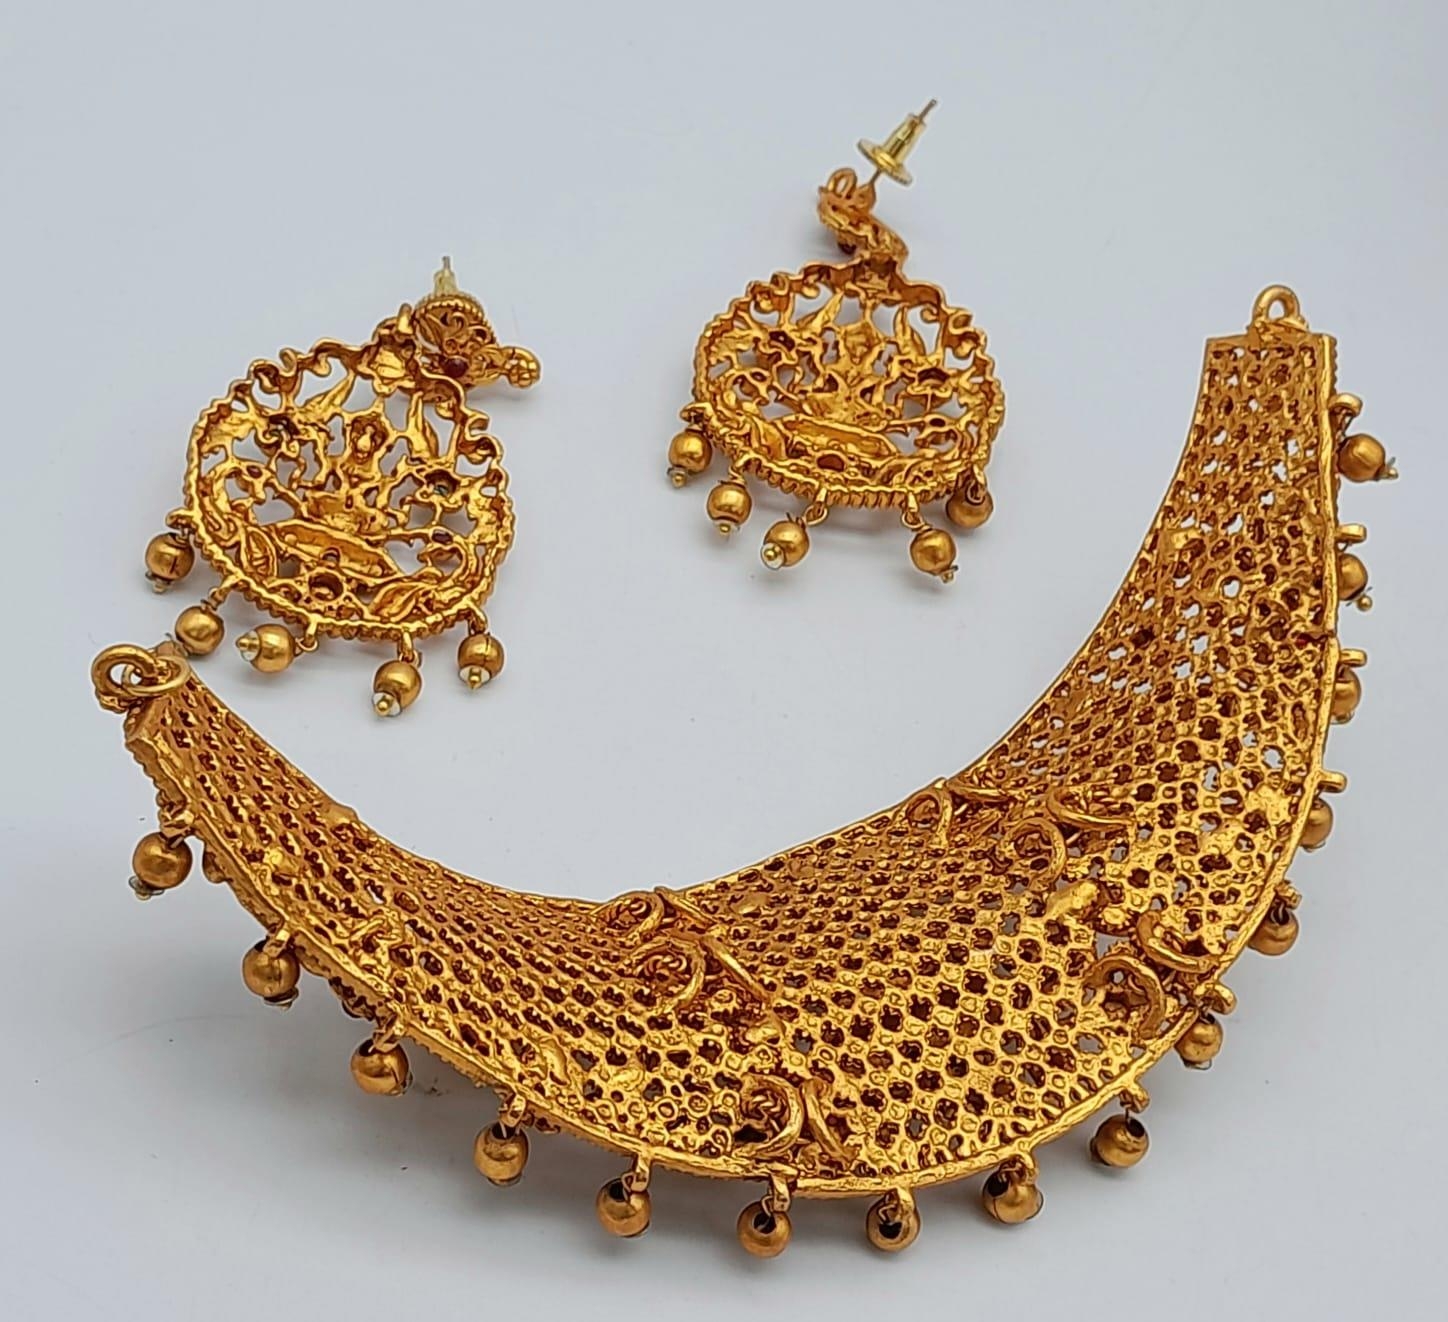 A South Indian traditional “Temple Jewellery” consisting of a necklace and matching earrings in an - Image 4 of 6